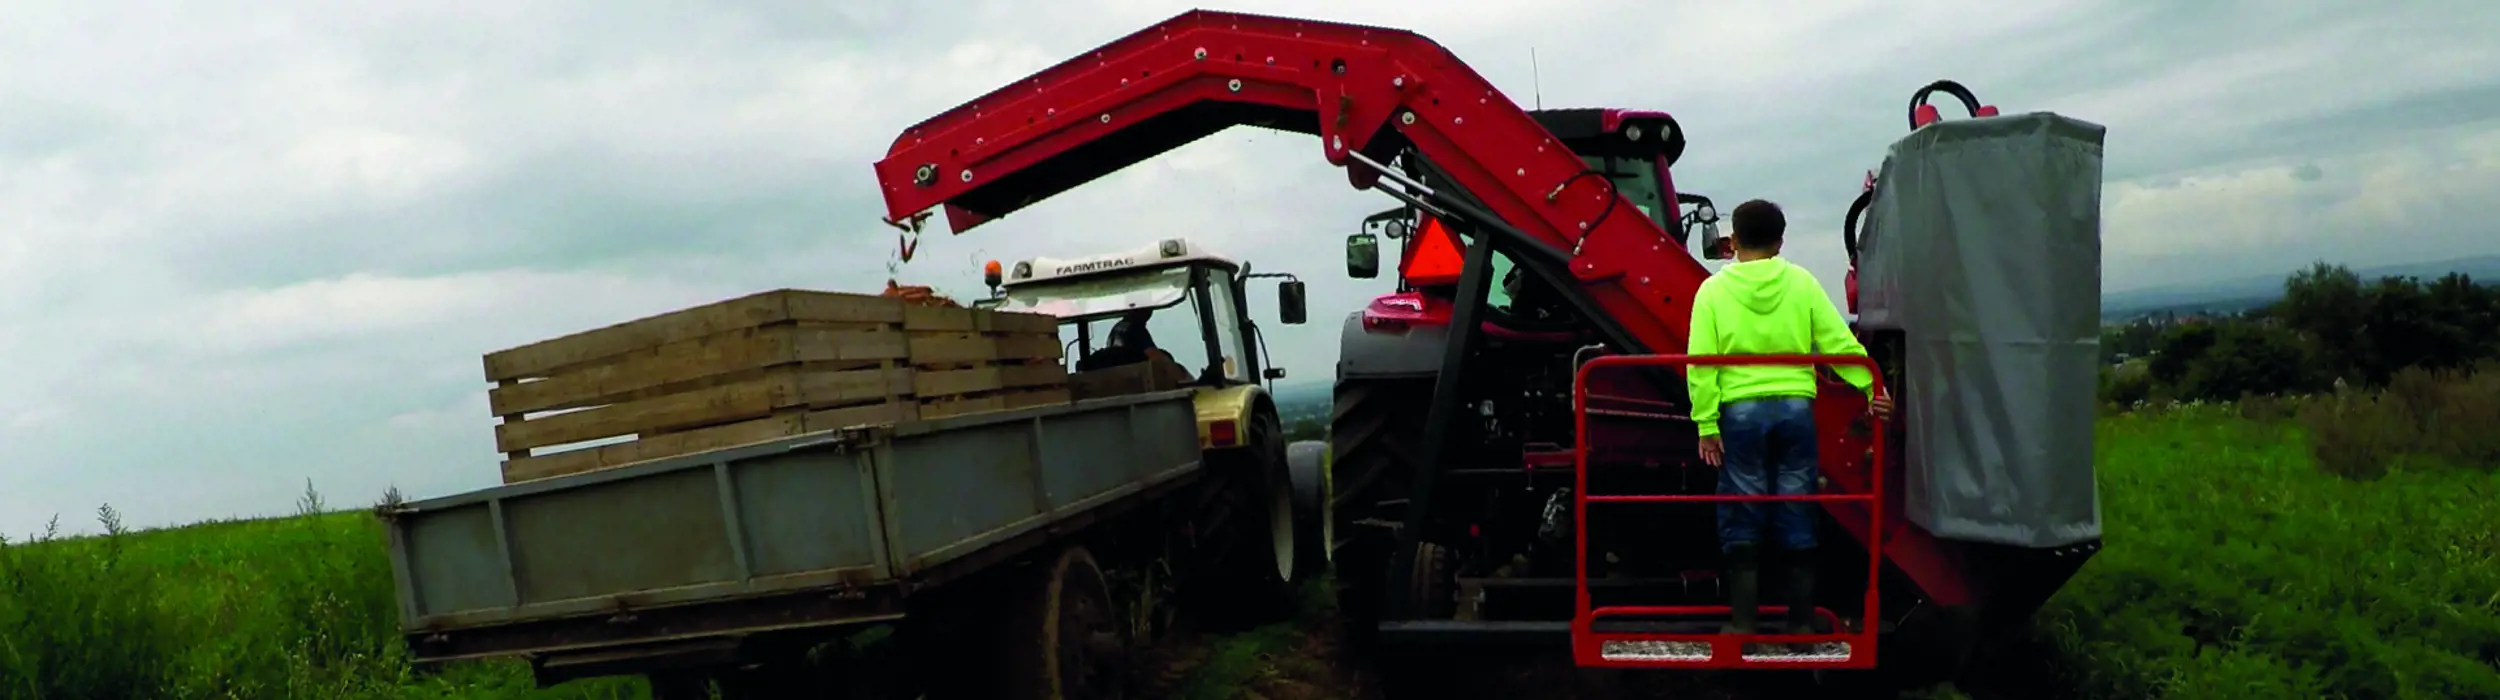 Mounted 1-row top lifting harvester with discharge elevator